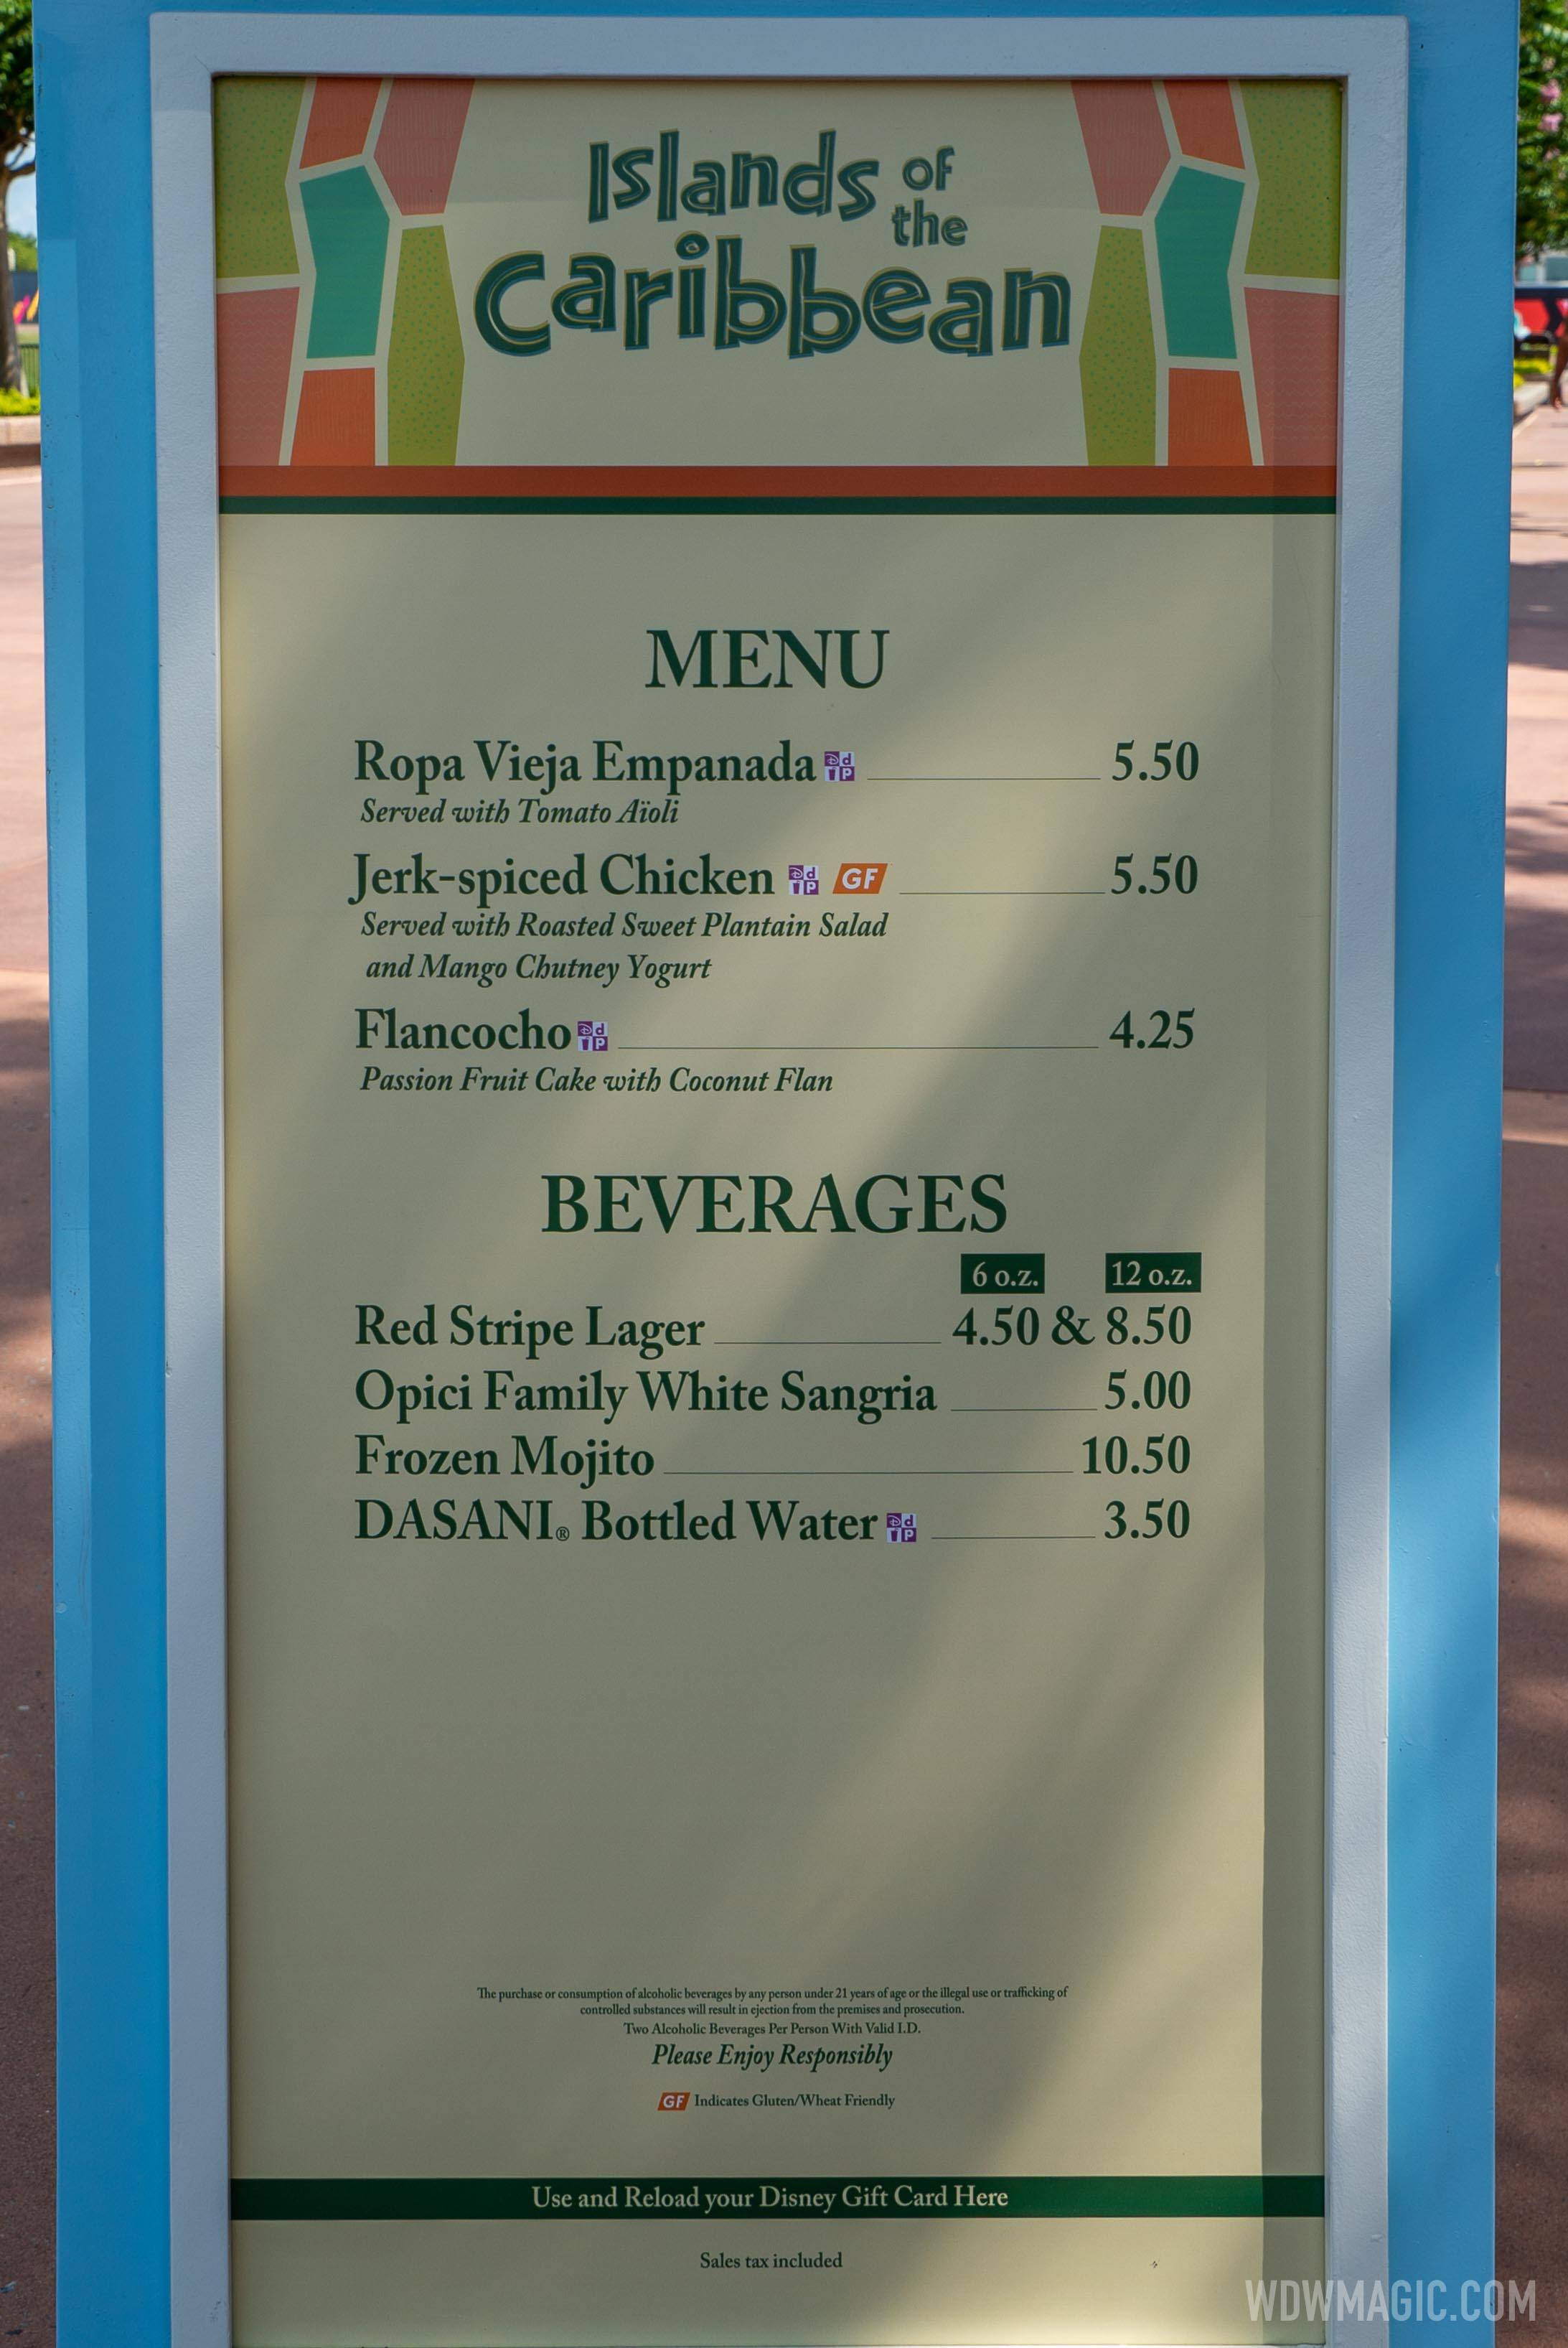 Taste of EPCOT Food and Wine Festival - Islands of the Caribbean menu